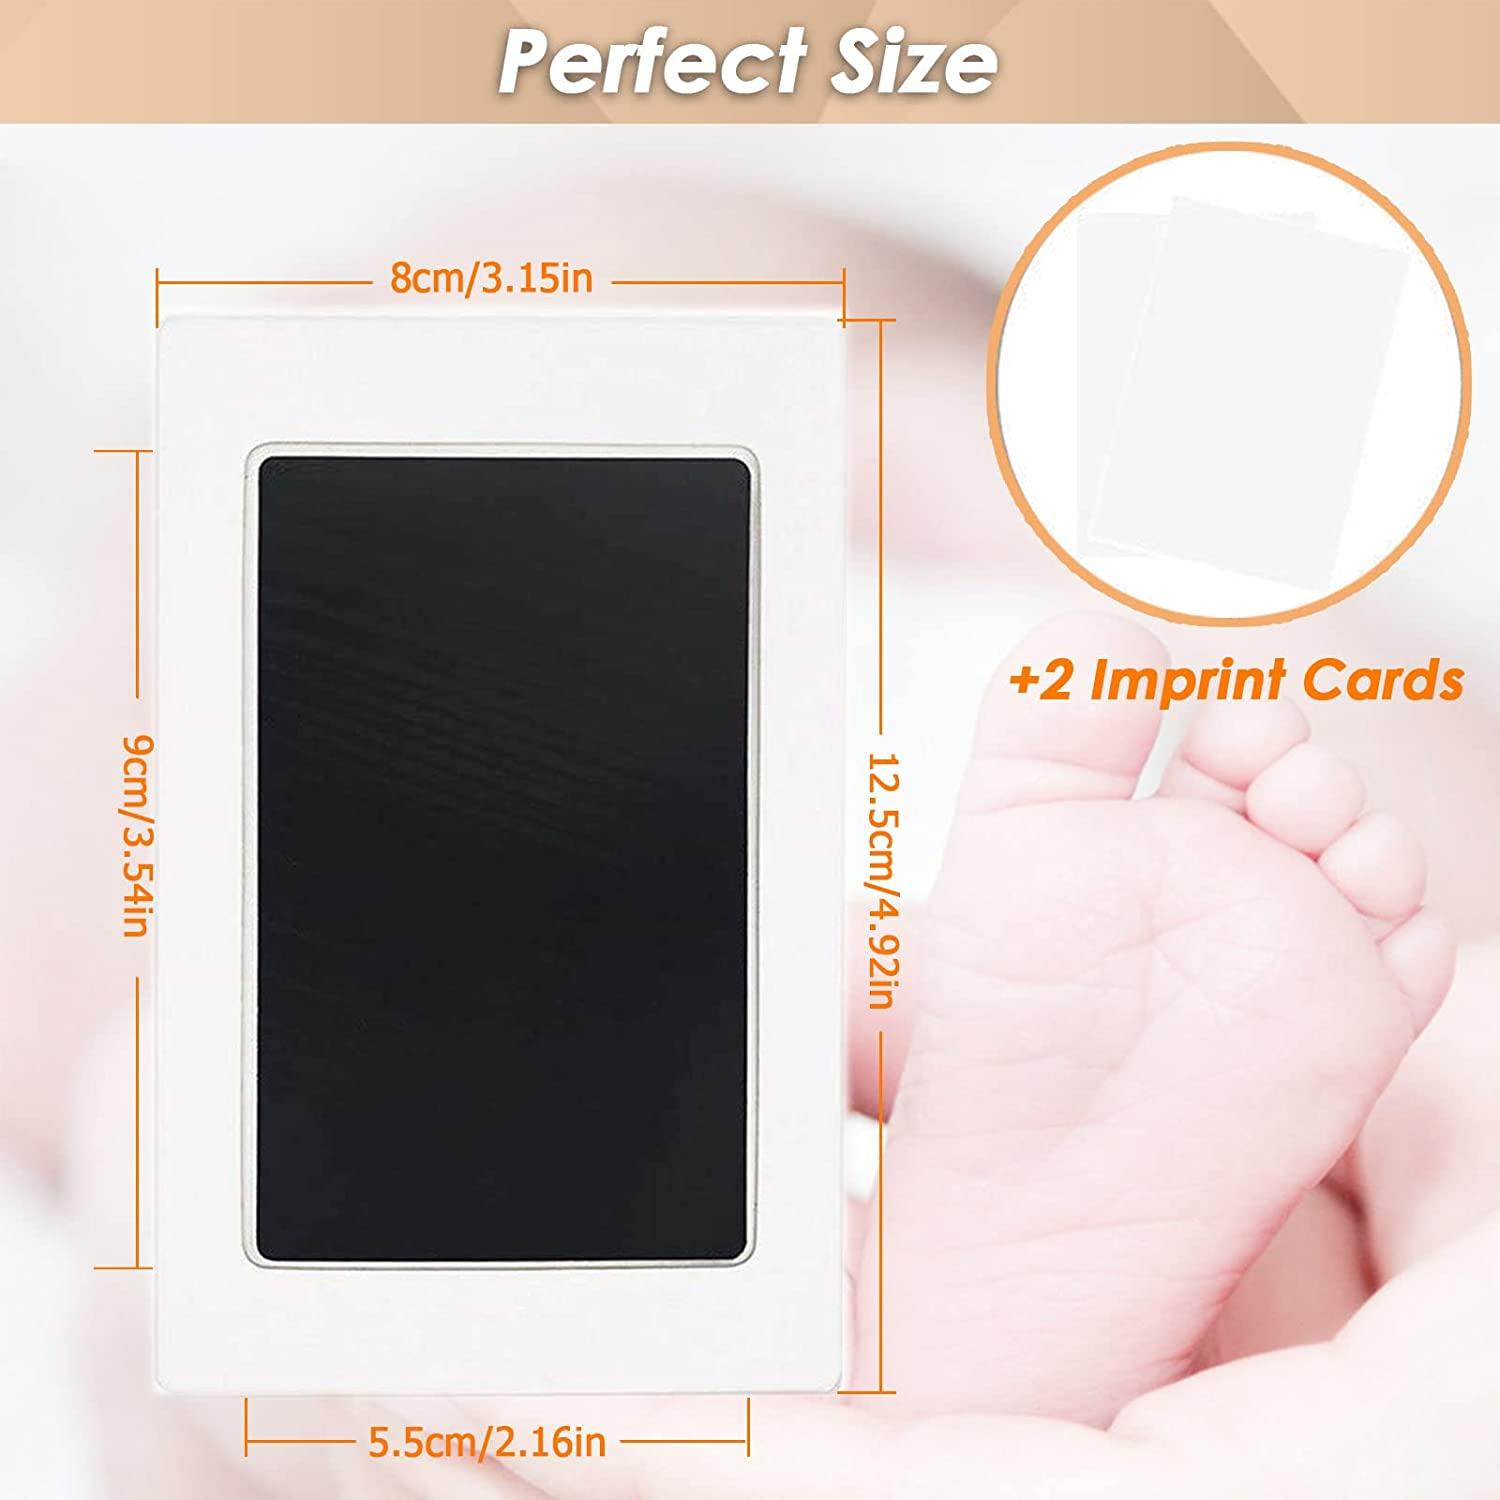 Clean Touch Ink Pad for Baby Handprints and Footprints Inkless